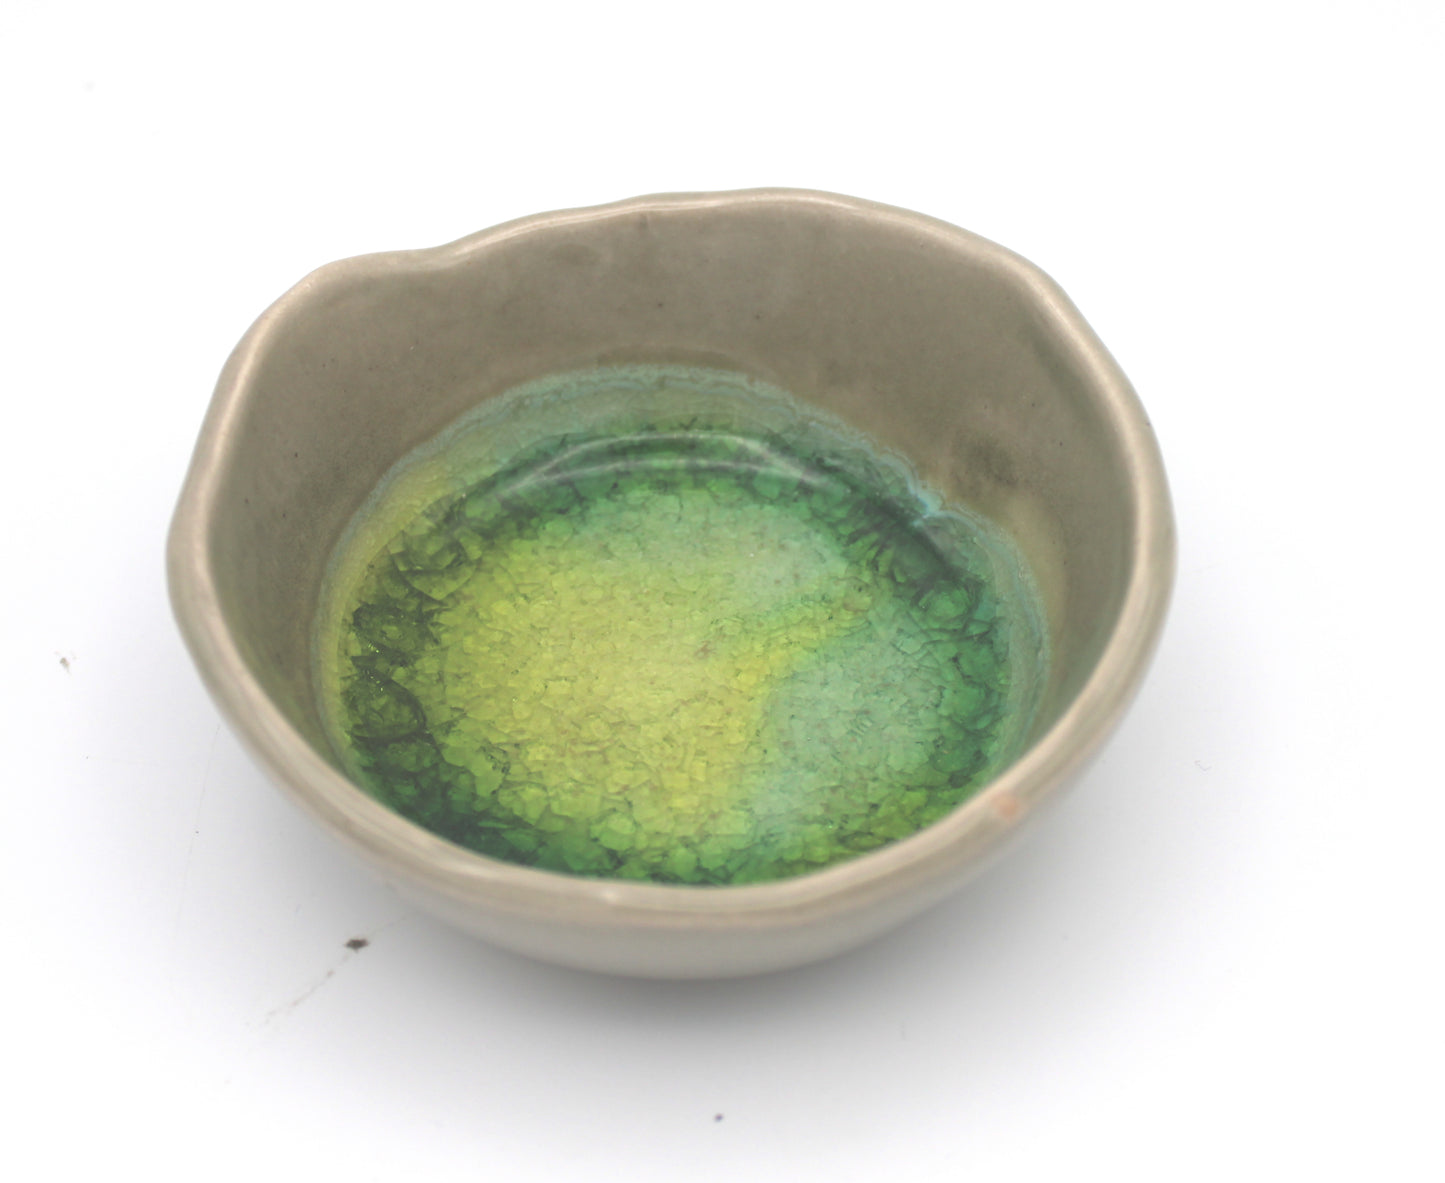 The Mood Designs Small Bowl in Sea Moss